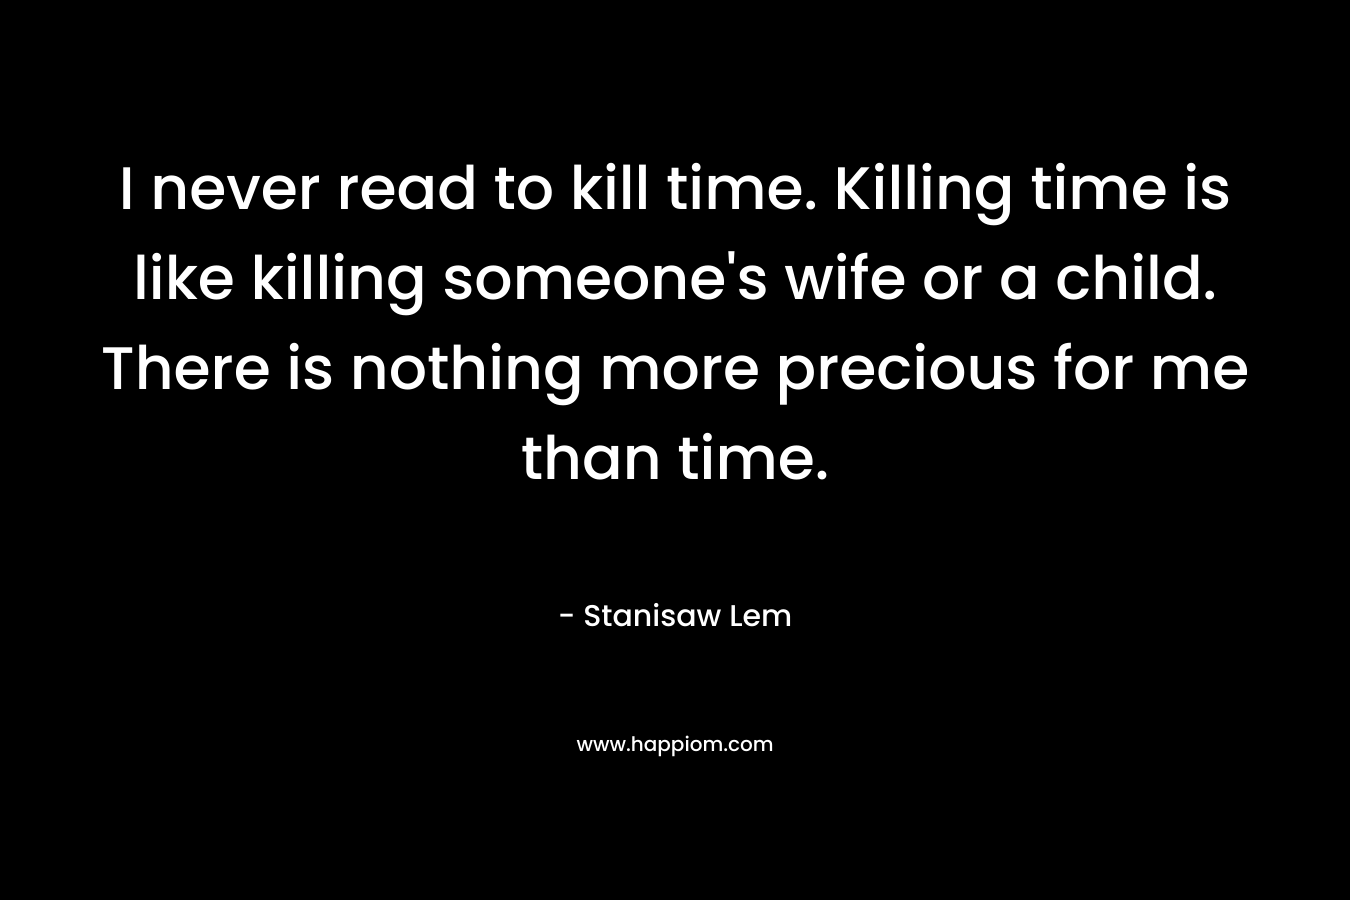 I never read to kill time. Killing time is like killing someone’s wife or a child. There is nothing more precious for me than time. – Stanisaw Lem